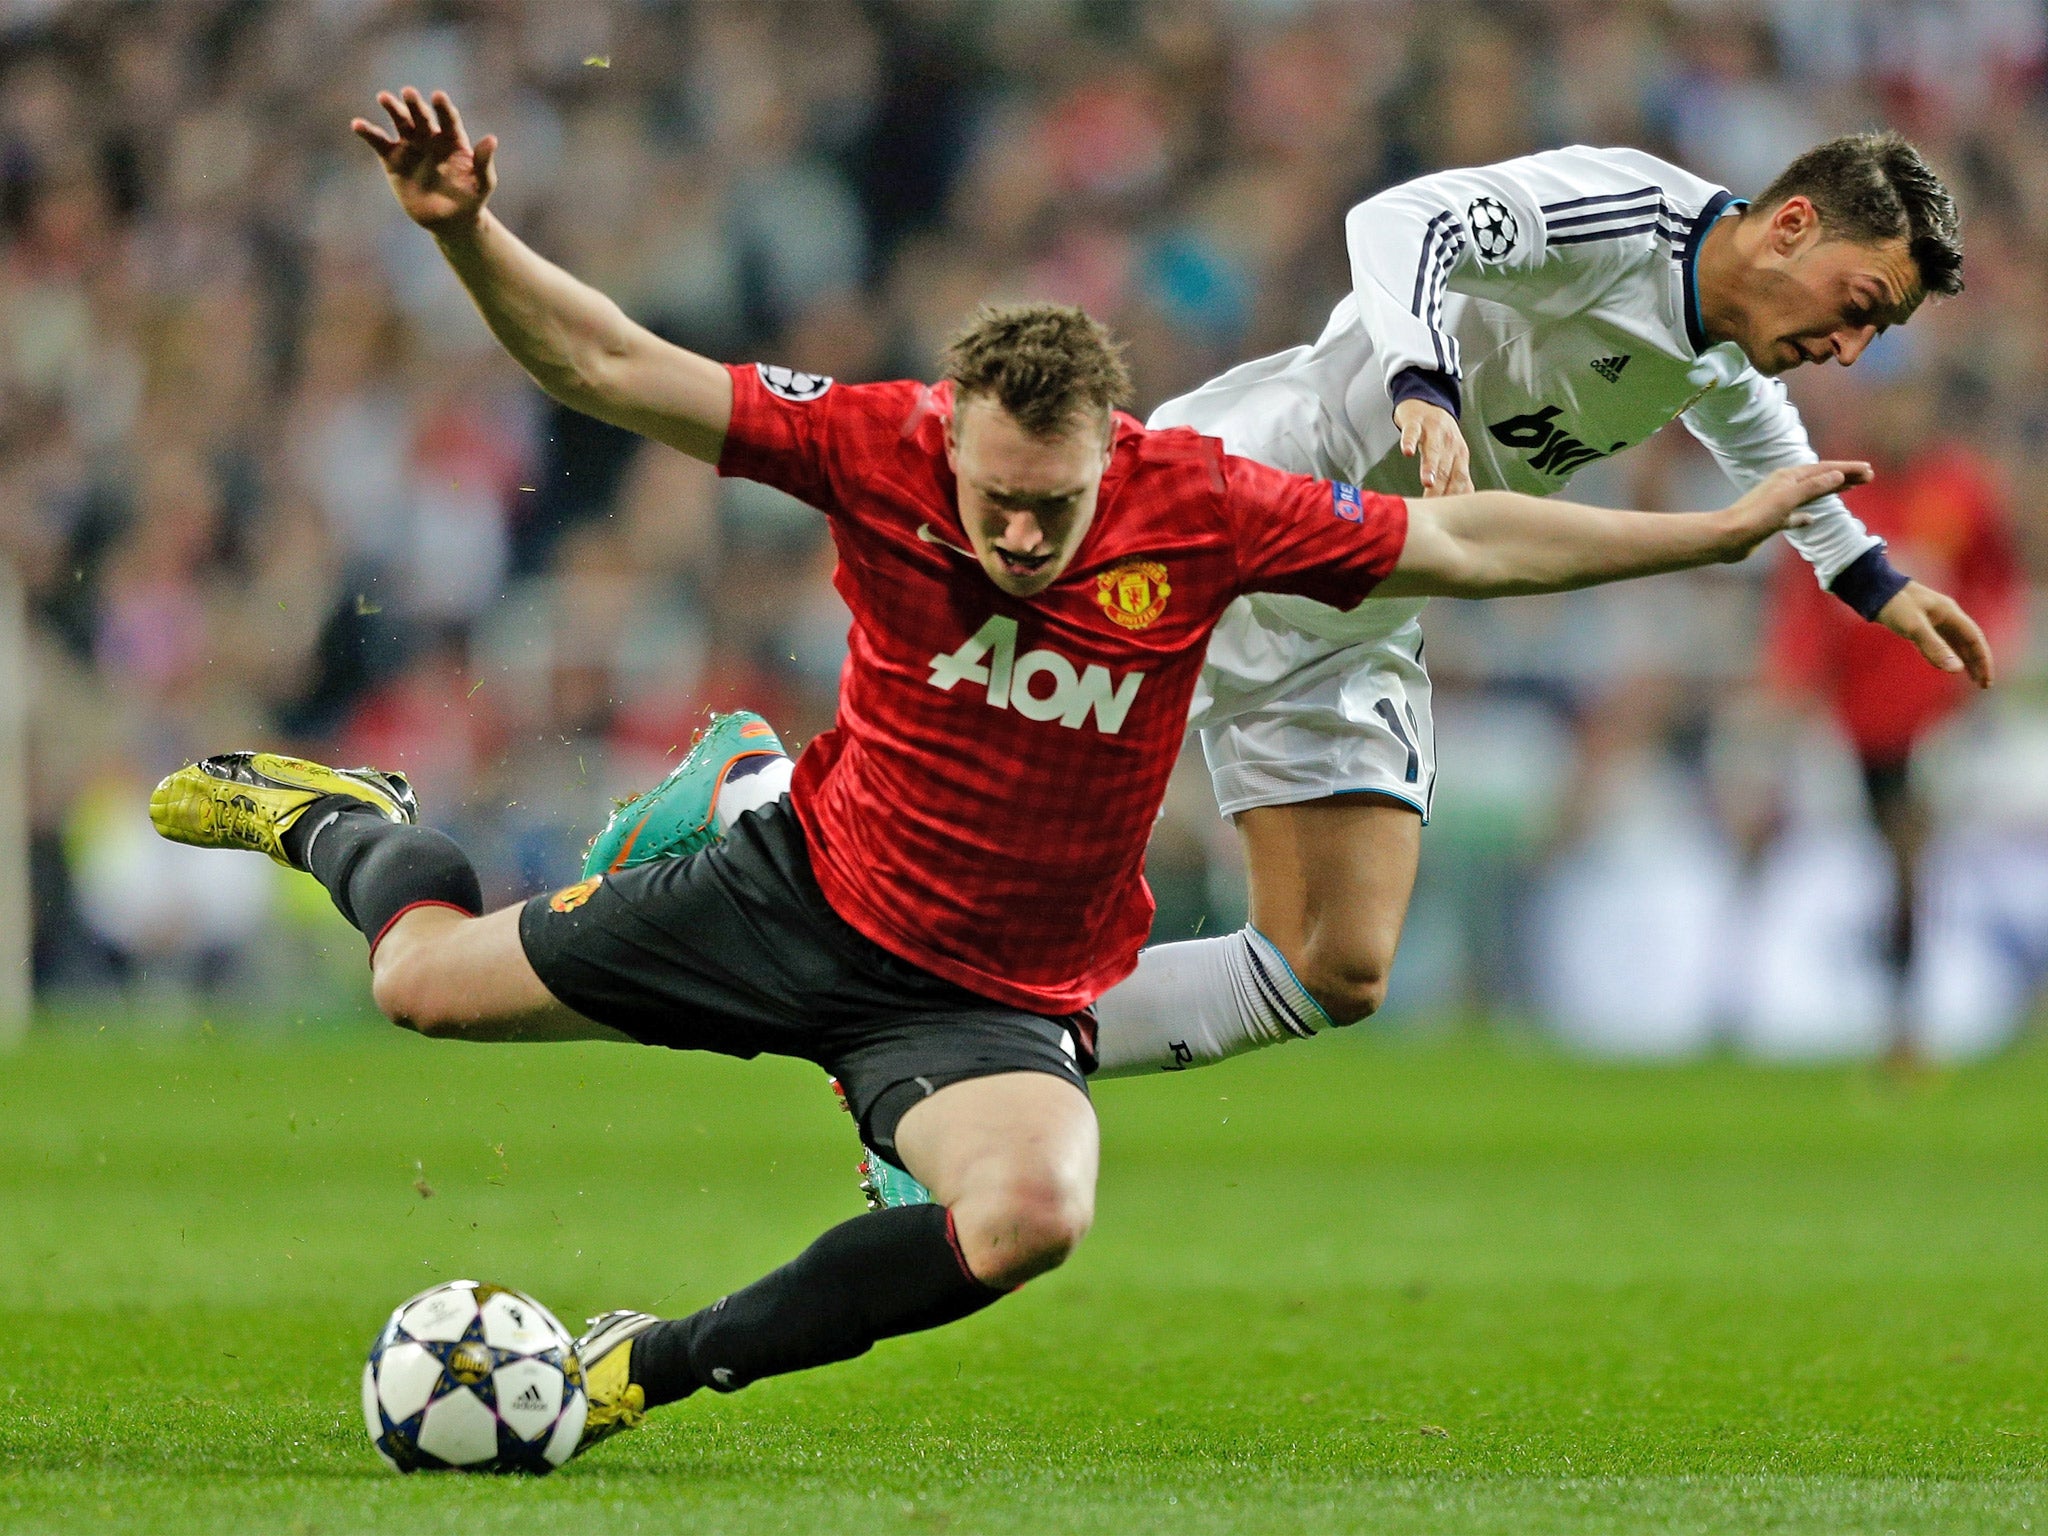 Phil Jones: Worked tirelessly in midfield to stifle Madrid. Might have conceded a penalty but otherwise solid. 8